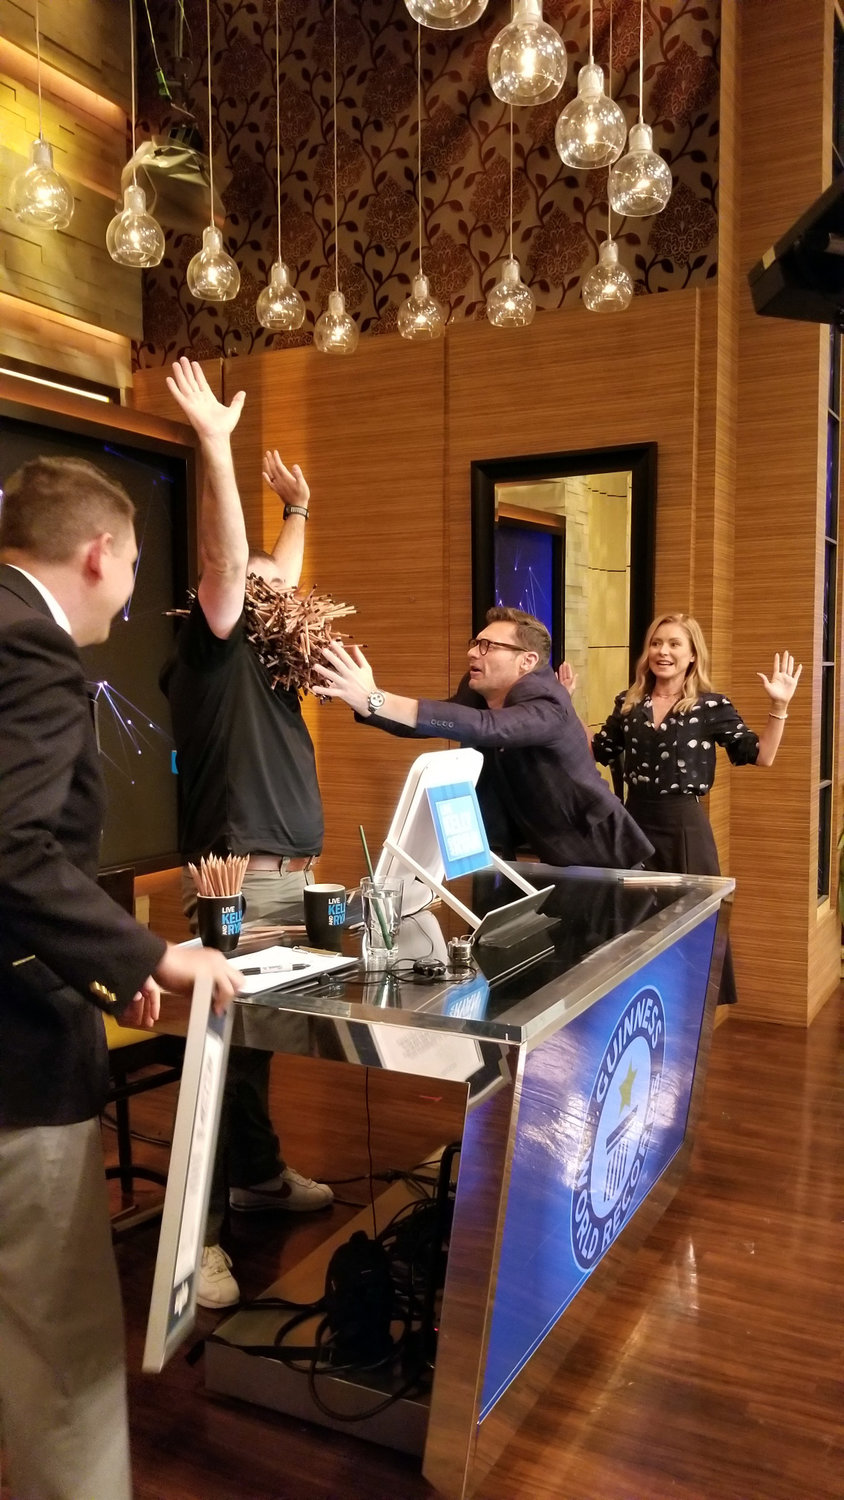 Ryan Seacrest touches the pencils that Joel Strasser placed in his beard as he was breaking the world record for the activity on the Kelly and Ryan show.